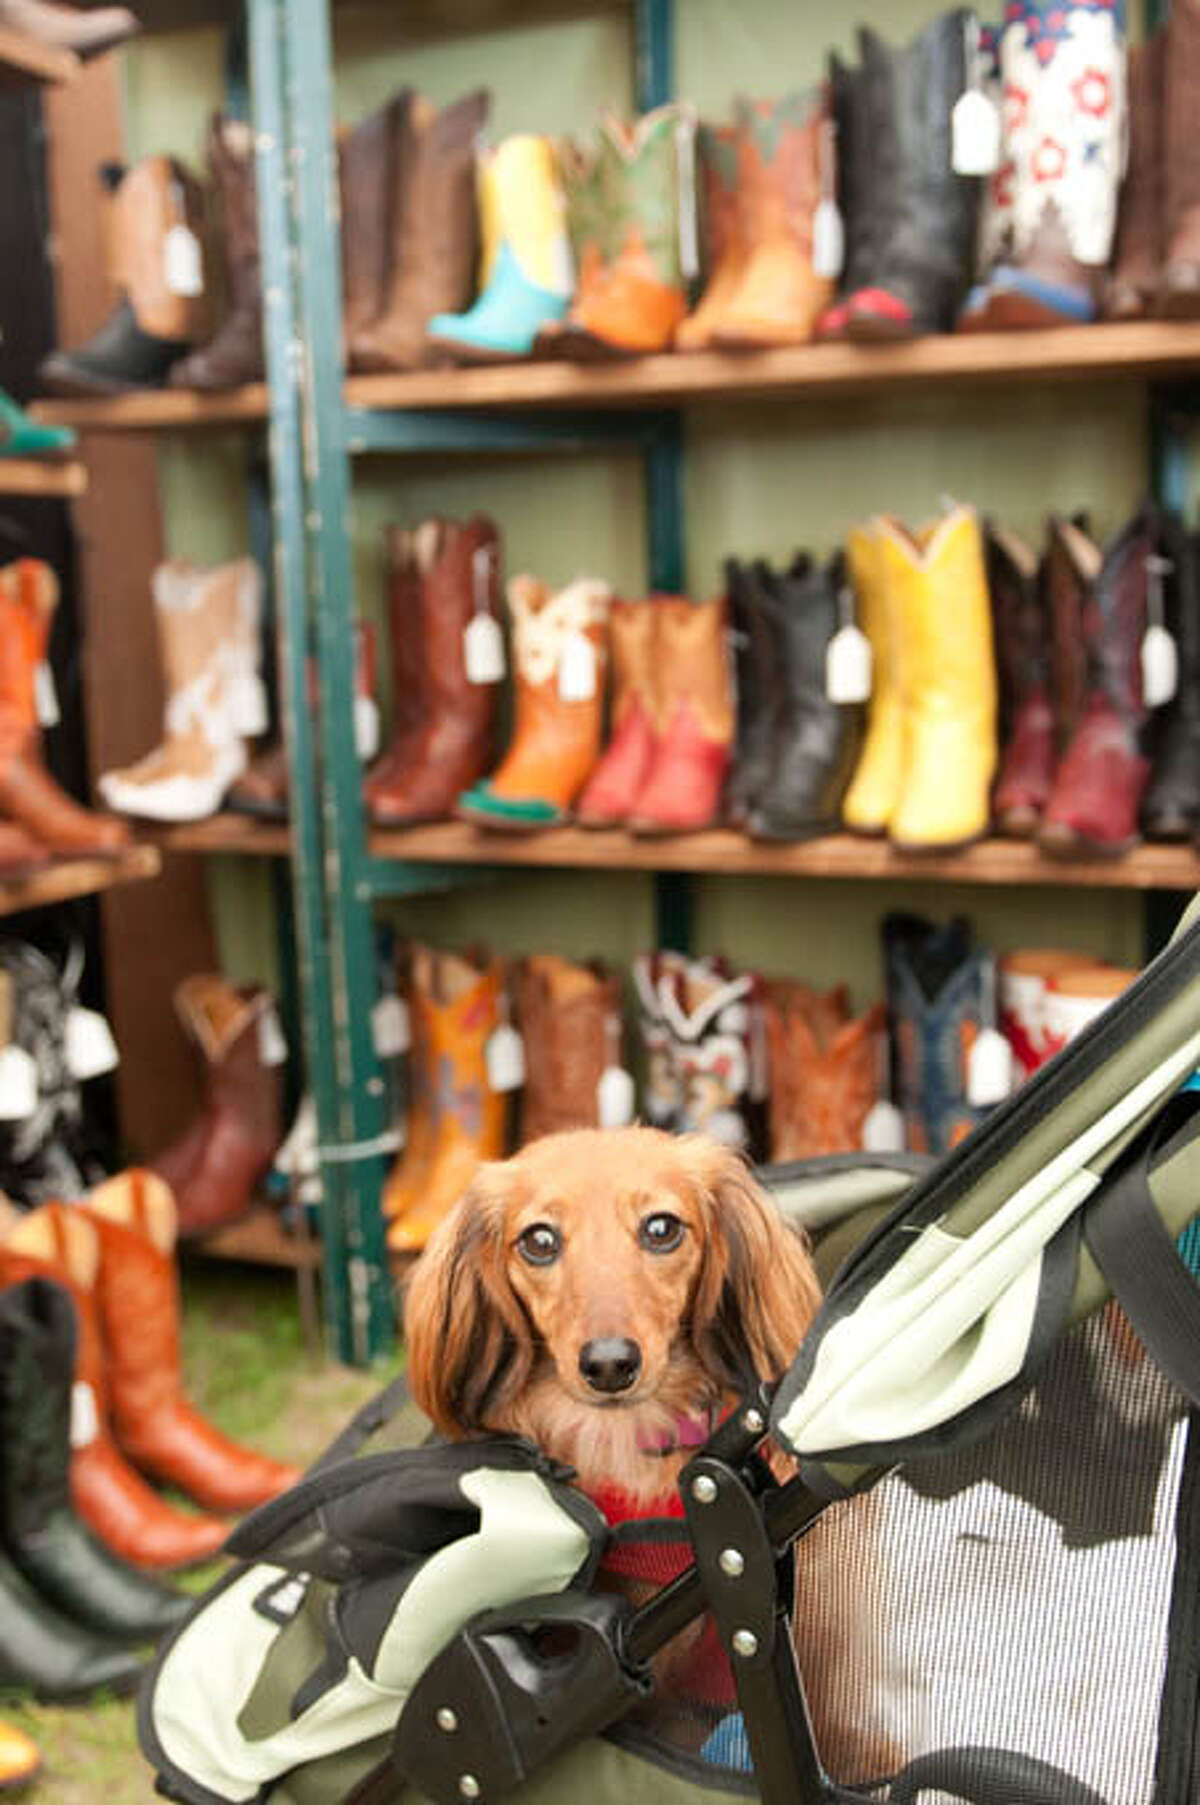 Vintage boots are a popular find up and down Texas Highway 237. This booth was one of 350 at a recent Marburger Farm Antique Show. Marburger's 43-acre field hosts 10 large large tents and 12 historic buildings. Its spring show opens March 31 and runs through April 4.